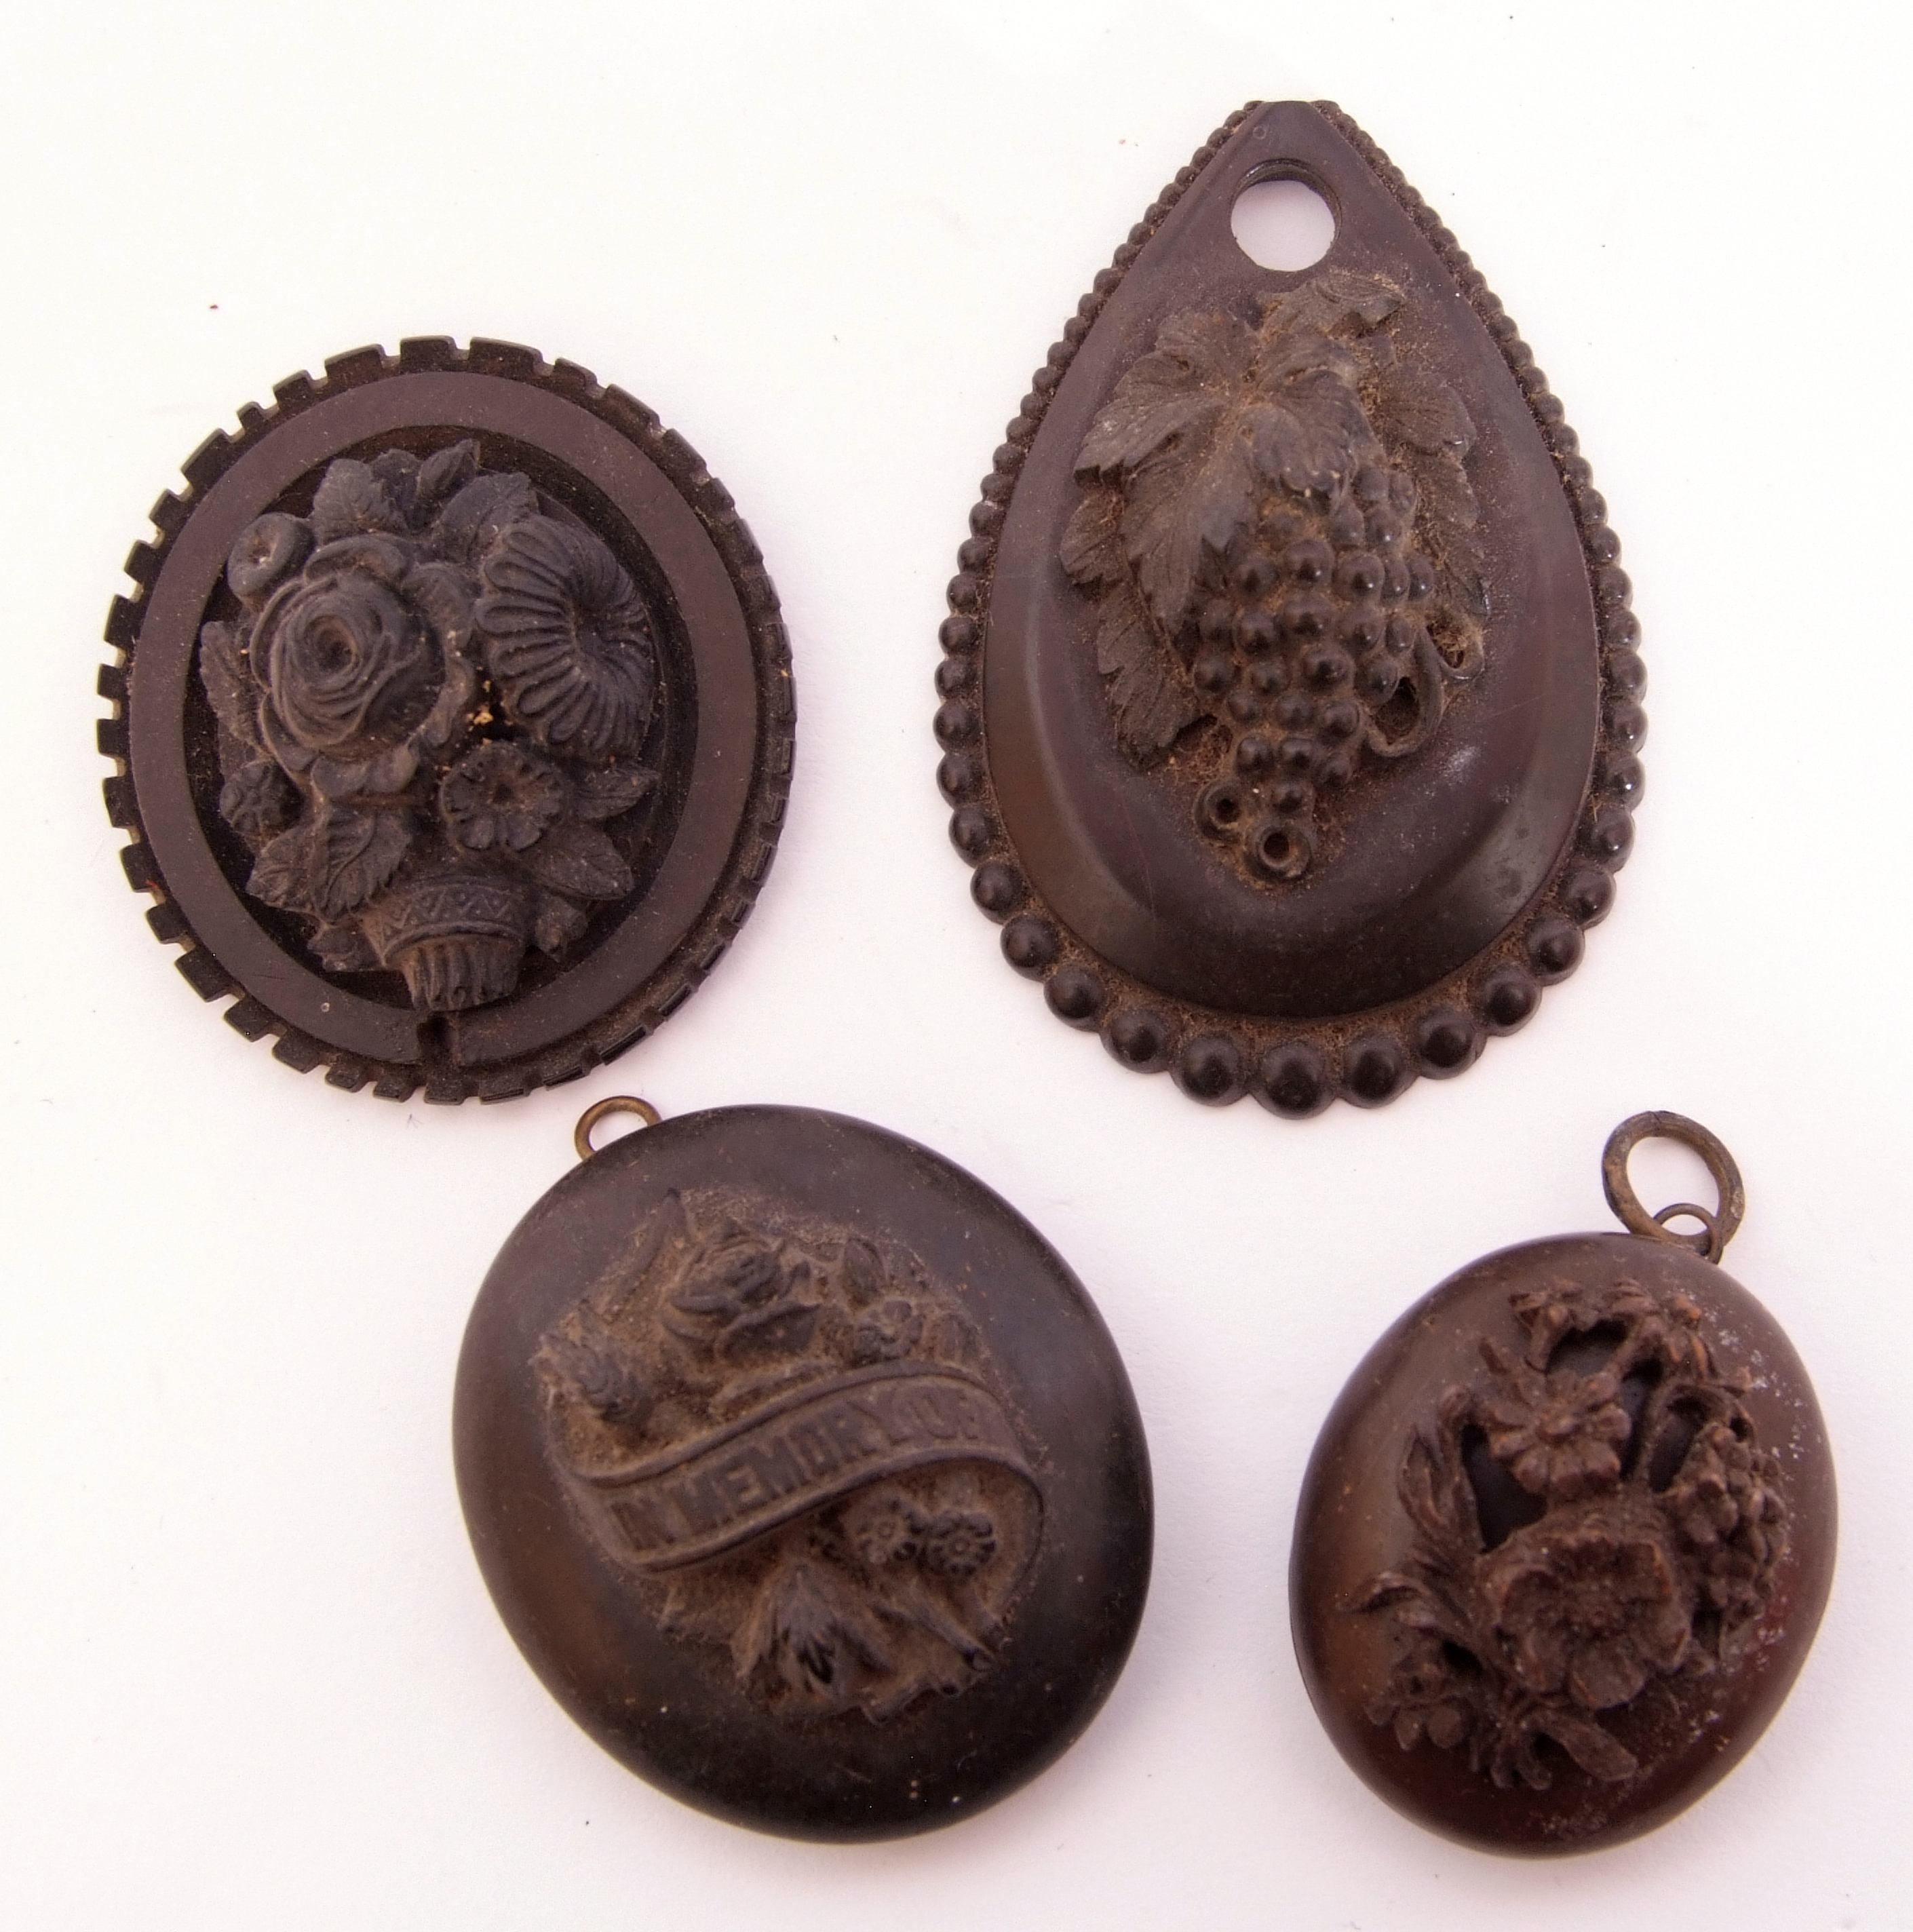 Mixed Lot: large vulcanite In Memoriam locket, a smaller vulcanite oval locket with carved floral